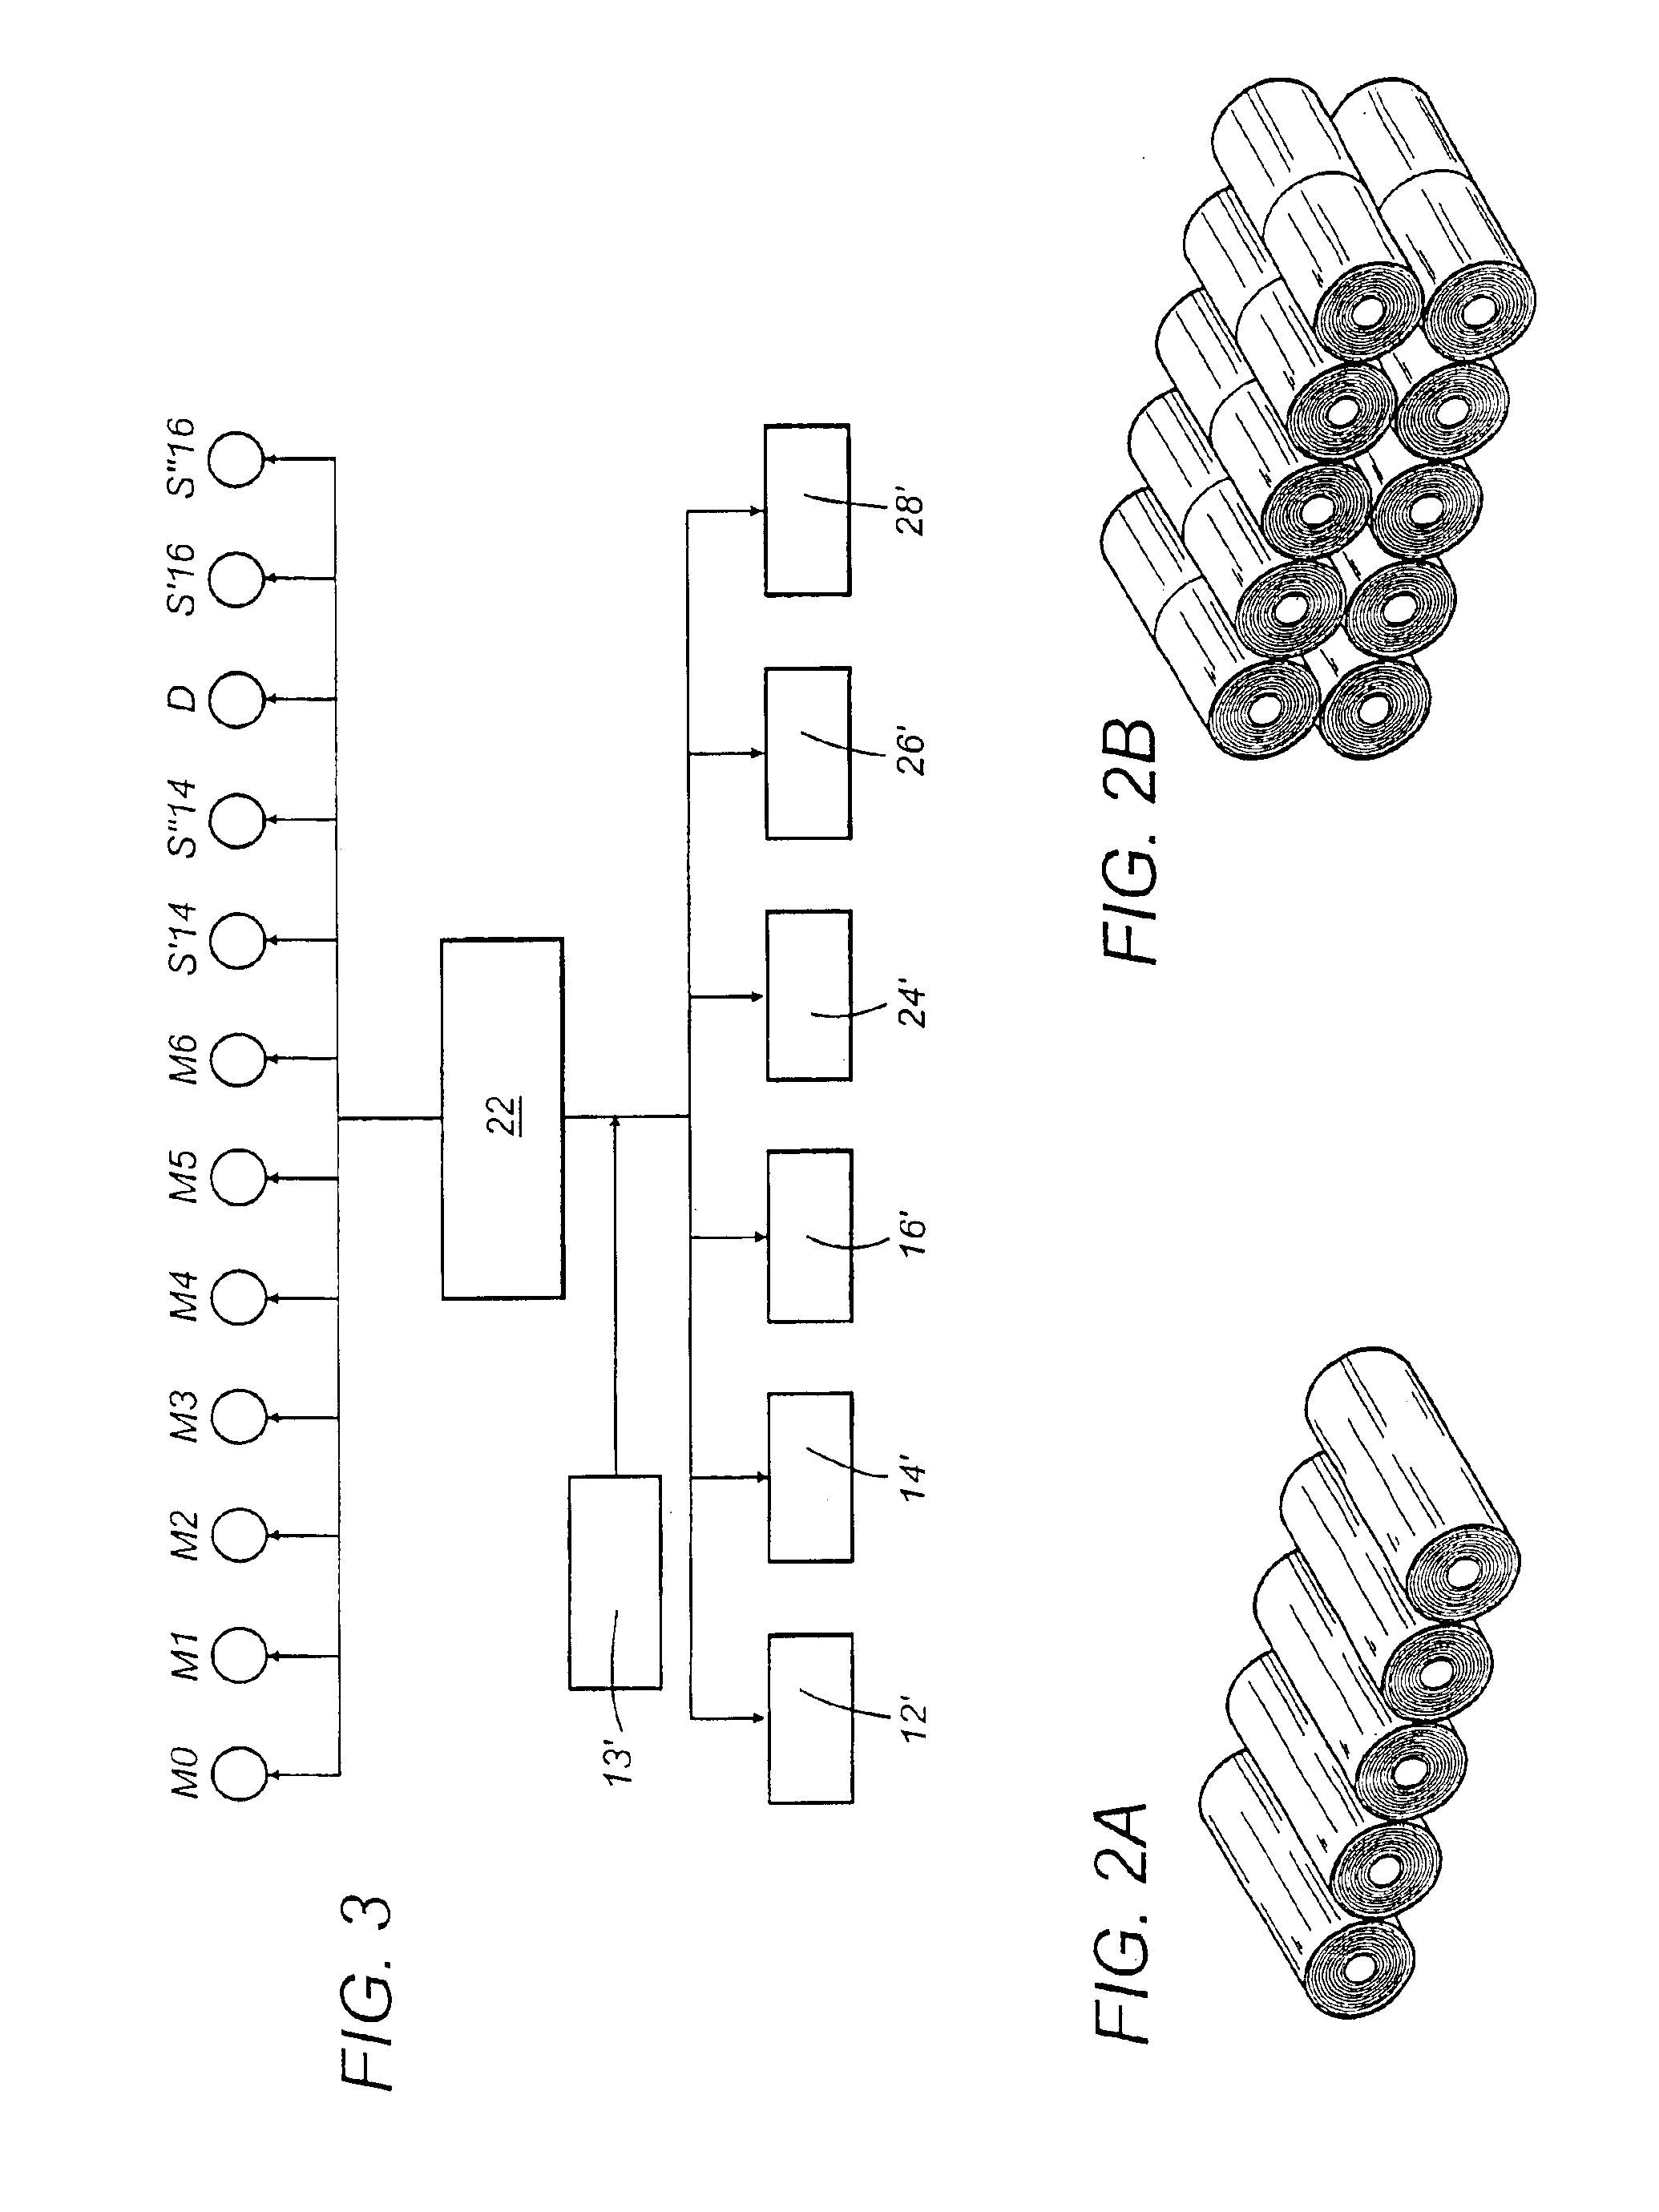 Method and a plant for producing articles, in particular paper rolls or the like, and a conveying apparatus usable in said plant